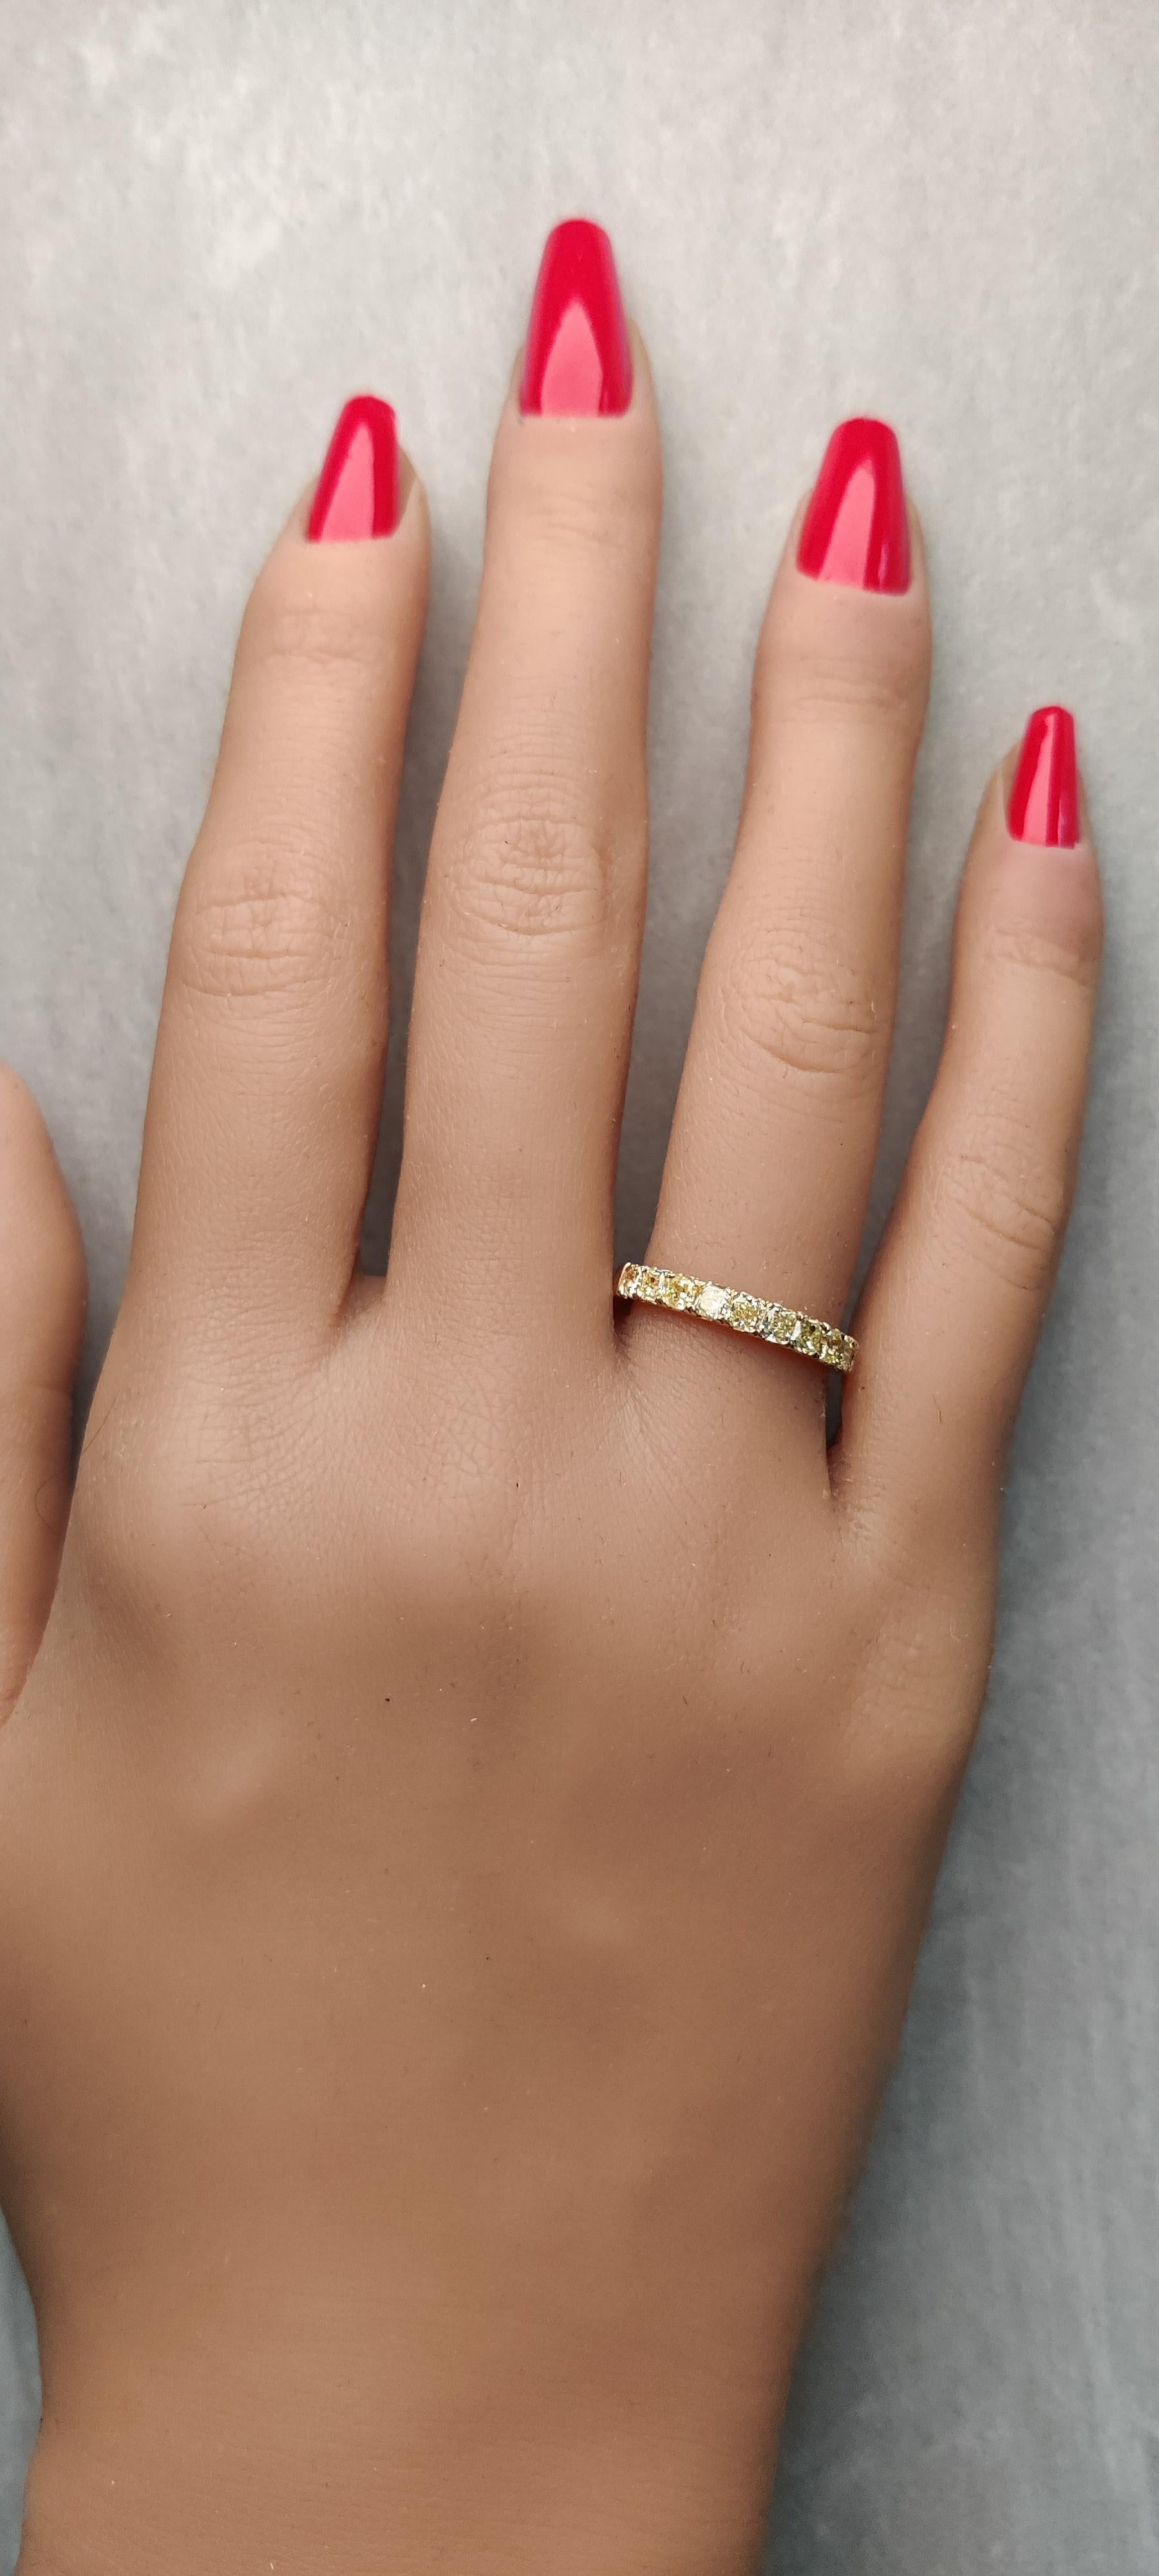 RareGemWorld's classic diamond band. Mounted in a beautiful 18K Yellow Gold setting with natural radiant yellow diamond's. This band is guaranteed to impress and enhance your personal collection!

Total Weight: 1.01cts

Natural Radiant Yellow